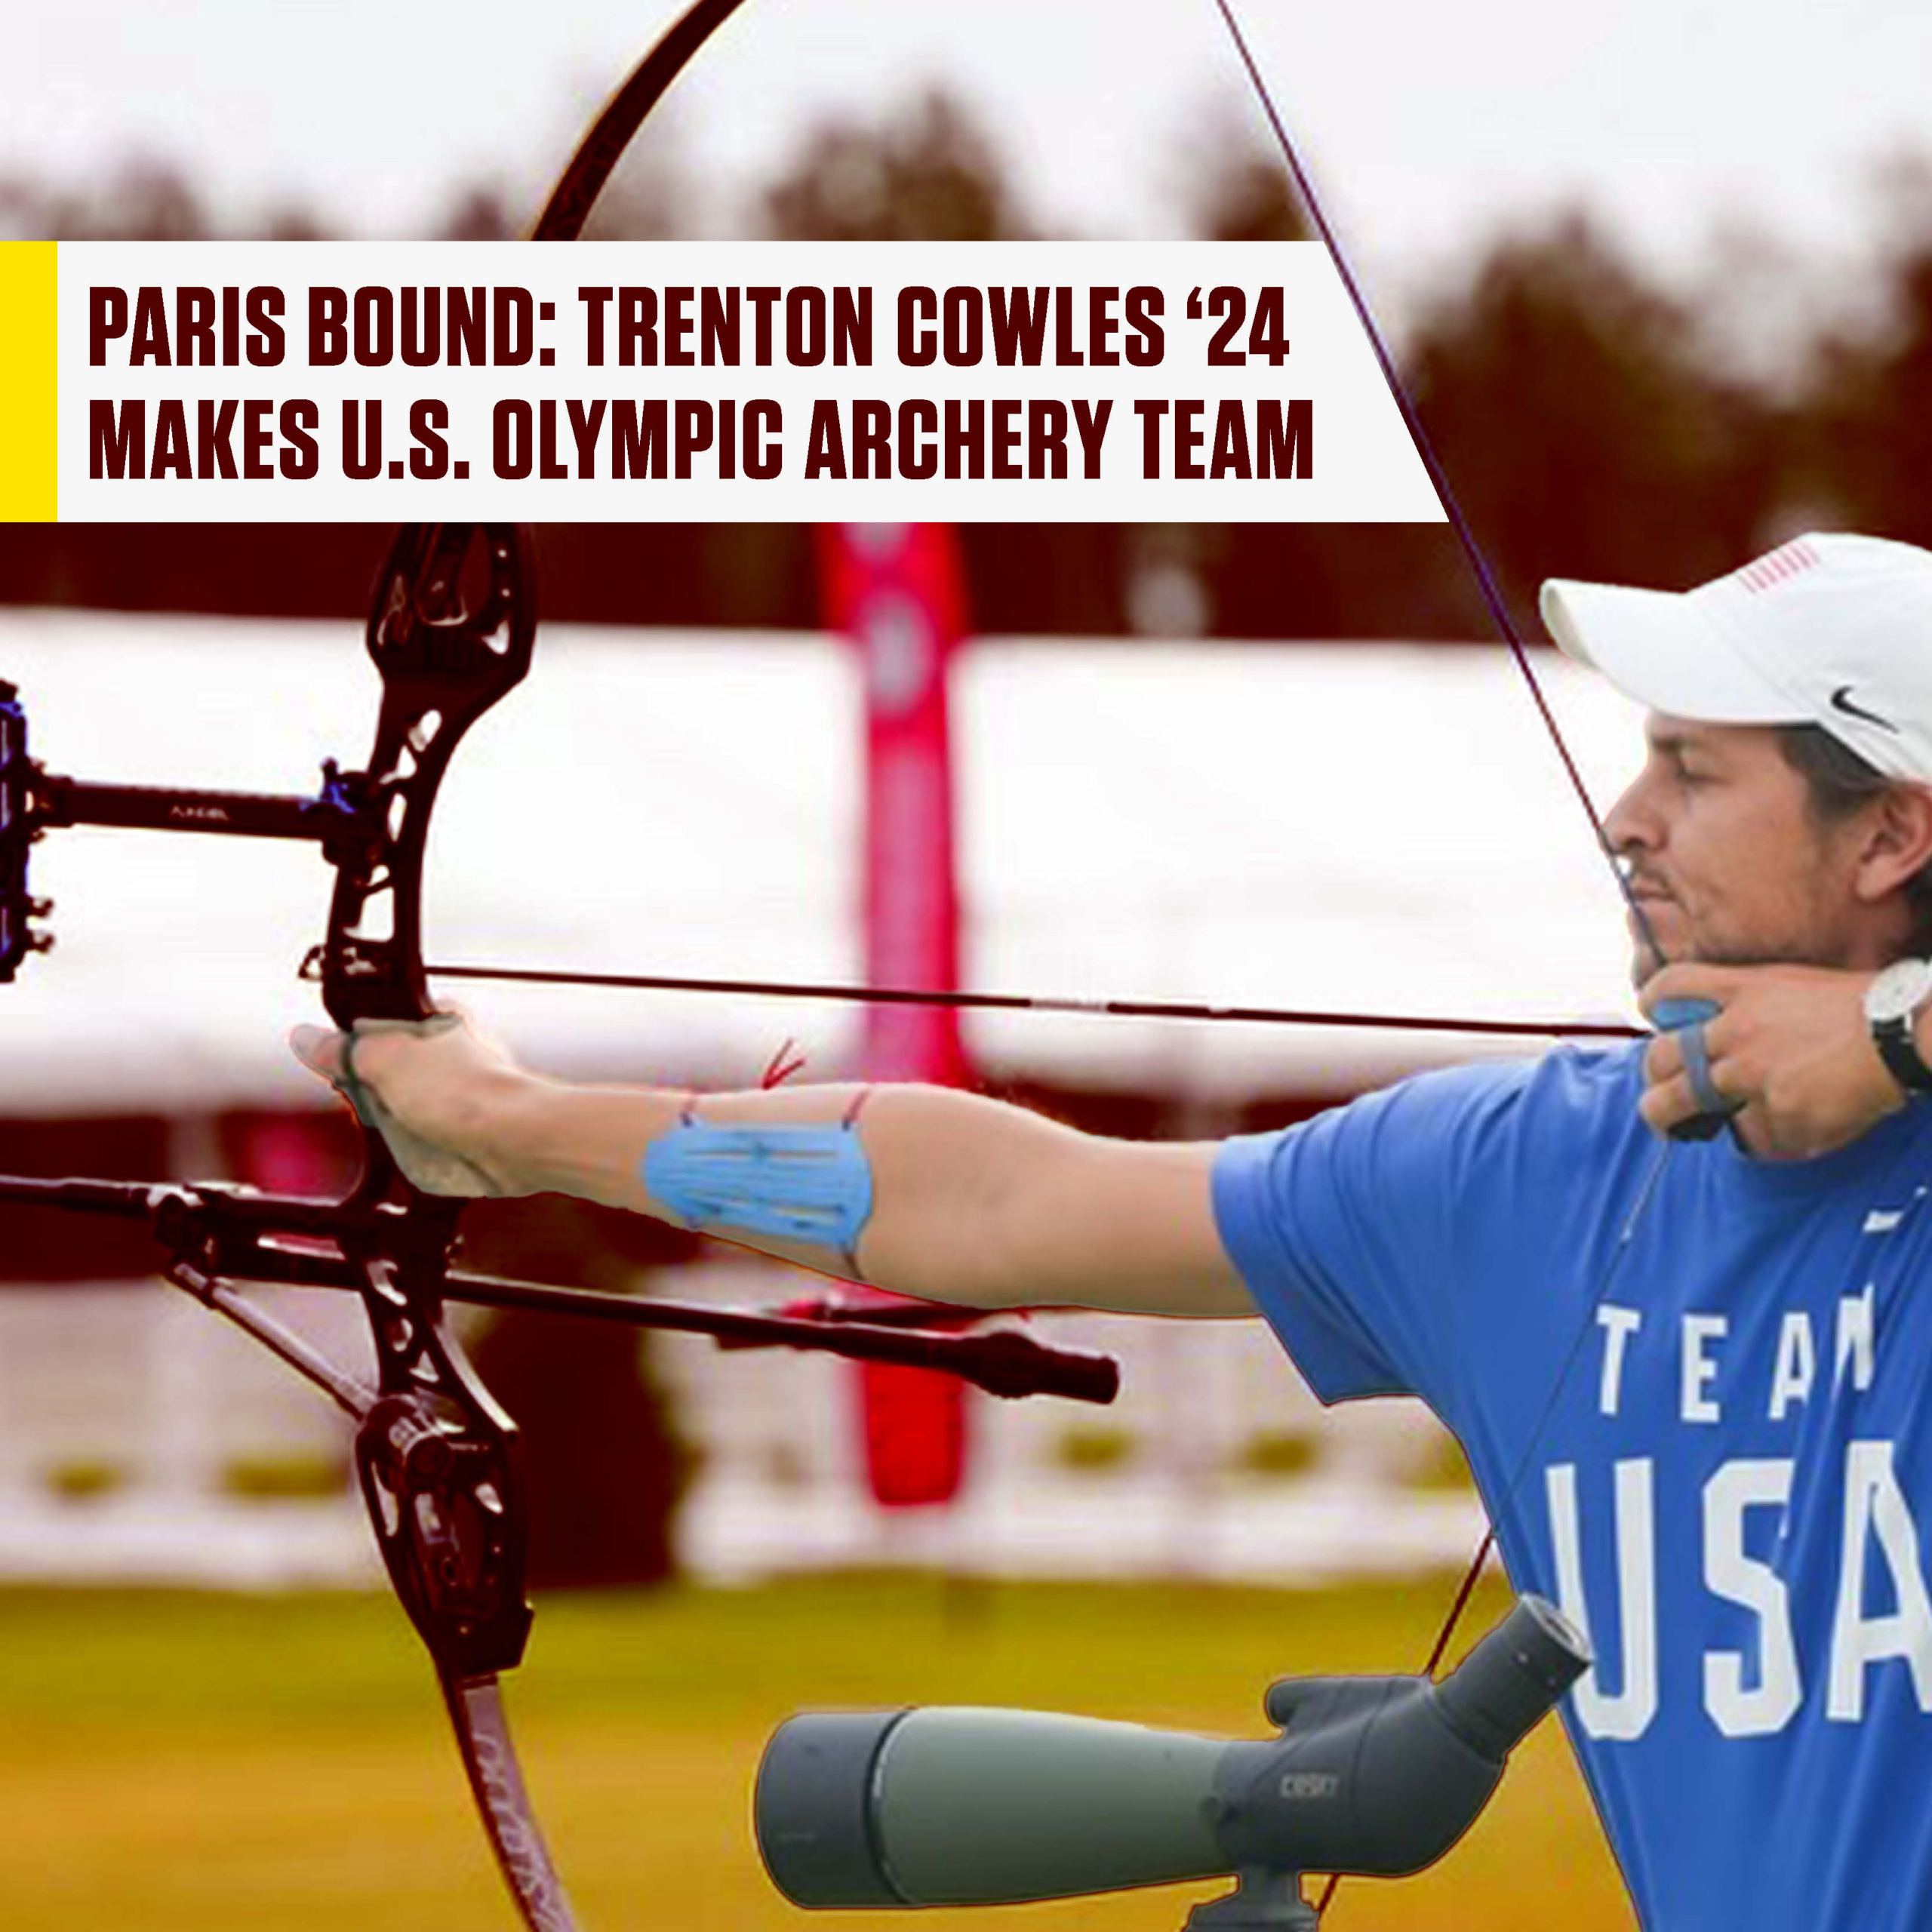 Trenton Cowles is holding his bow and arrow playing archery, competing to be on the United States Olympic Archery Team. With text over the top that states: Paris Bound, Trenton Cowles '24 makes U.S. Olympic Archery Team